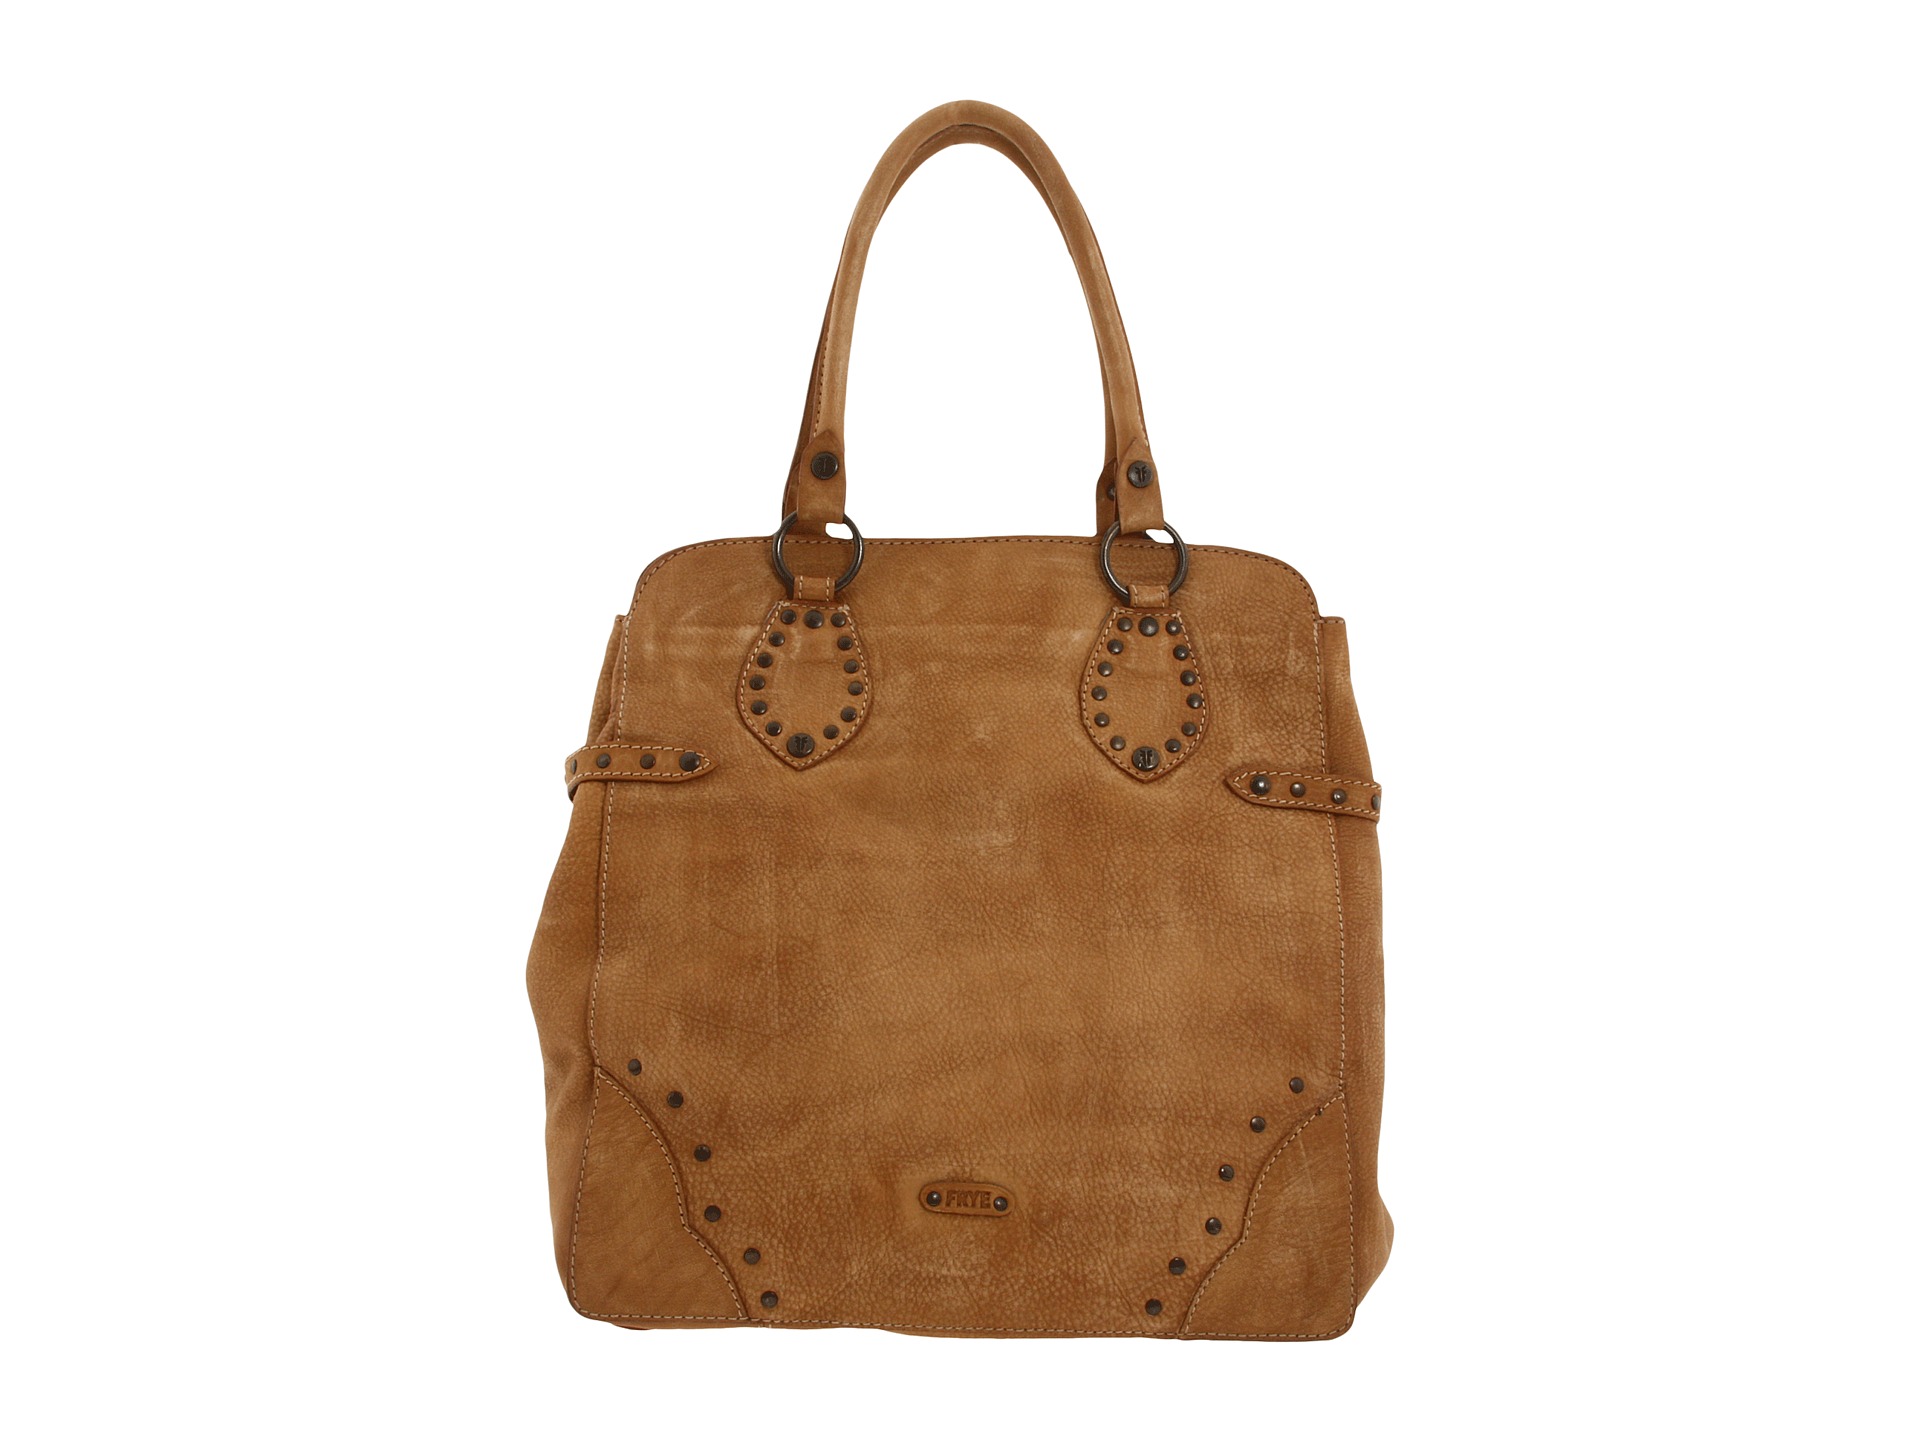 Frye Vintage Stud Tote | Shipped Free at Zappos